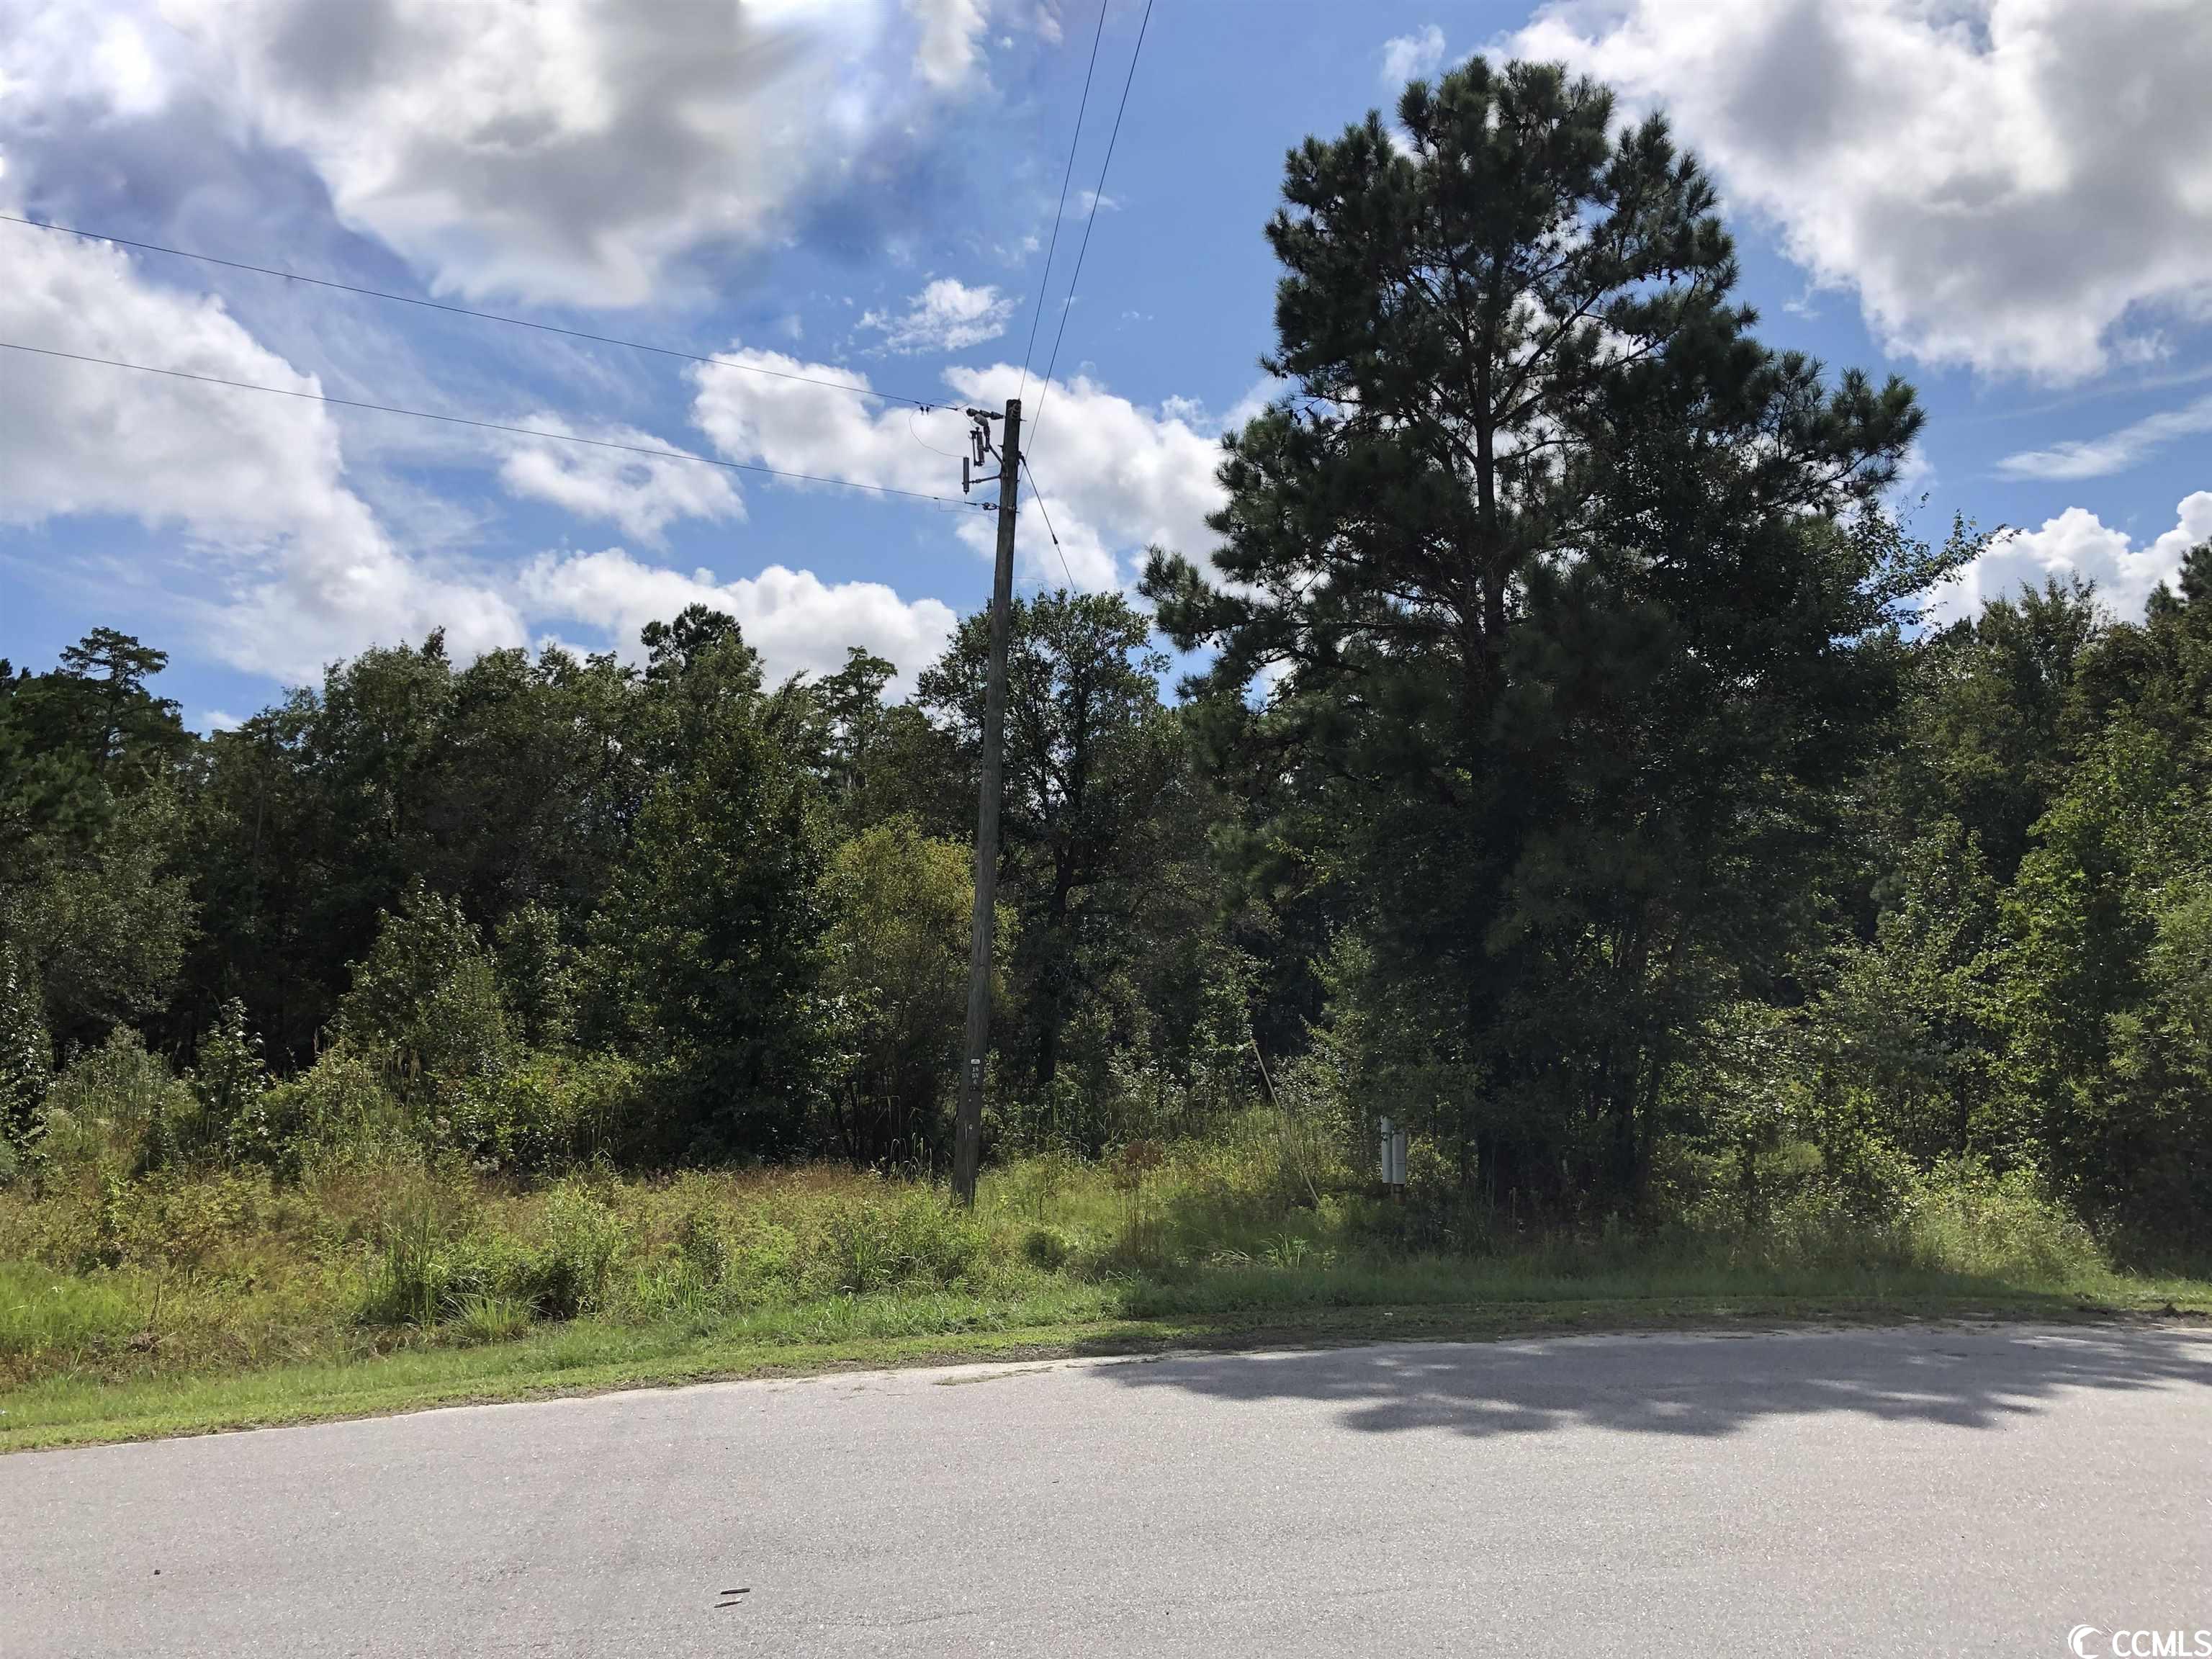 build your perfect home or put your mobile home on this 1 acre lot in conway.  it is in a flood zone but has public water and would have to be approved for an engineered septic system.  the estimated cost for this system is 8500.00 and would be done by an engineering company. buyers responsibility to verify this cost.  this neighborhood is very quiet and the beach is only 15 minutes or so away.  if you like the river a county maintained boat landing is only about 1/2 mile away.  please see personal interest disclosure in documents.